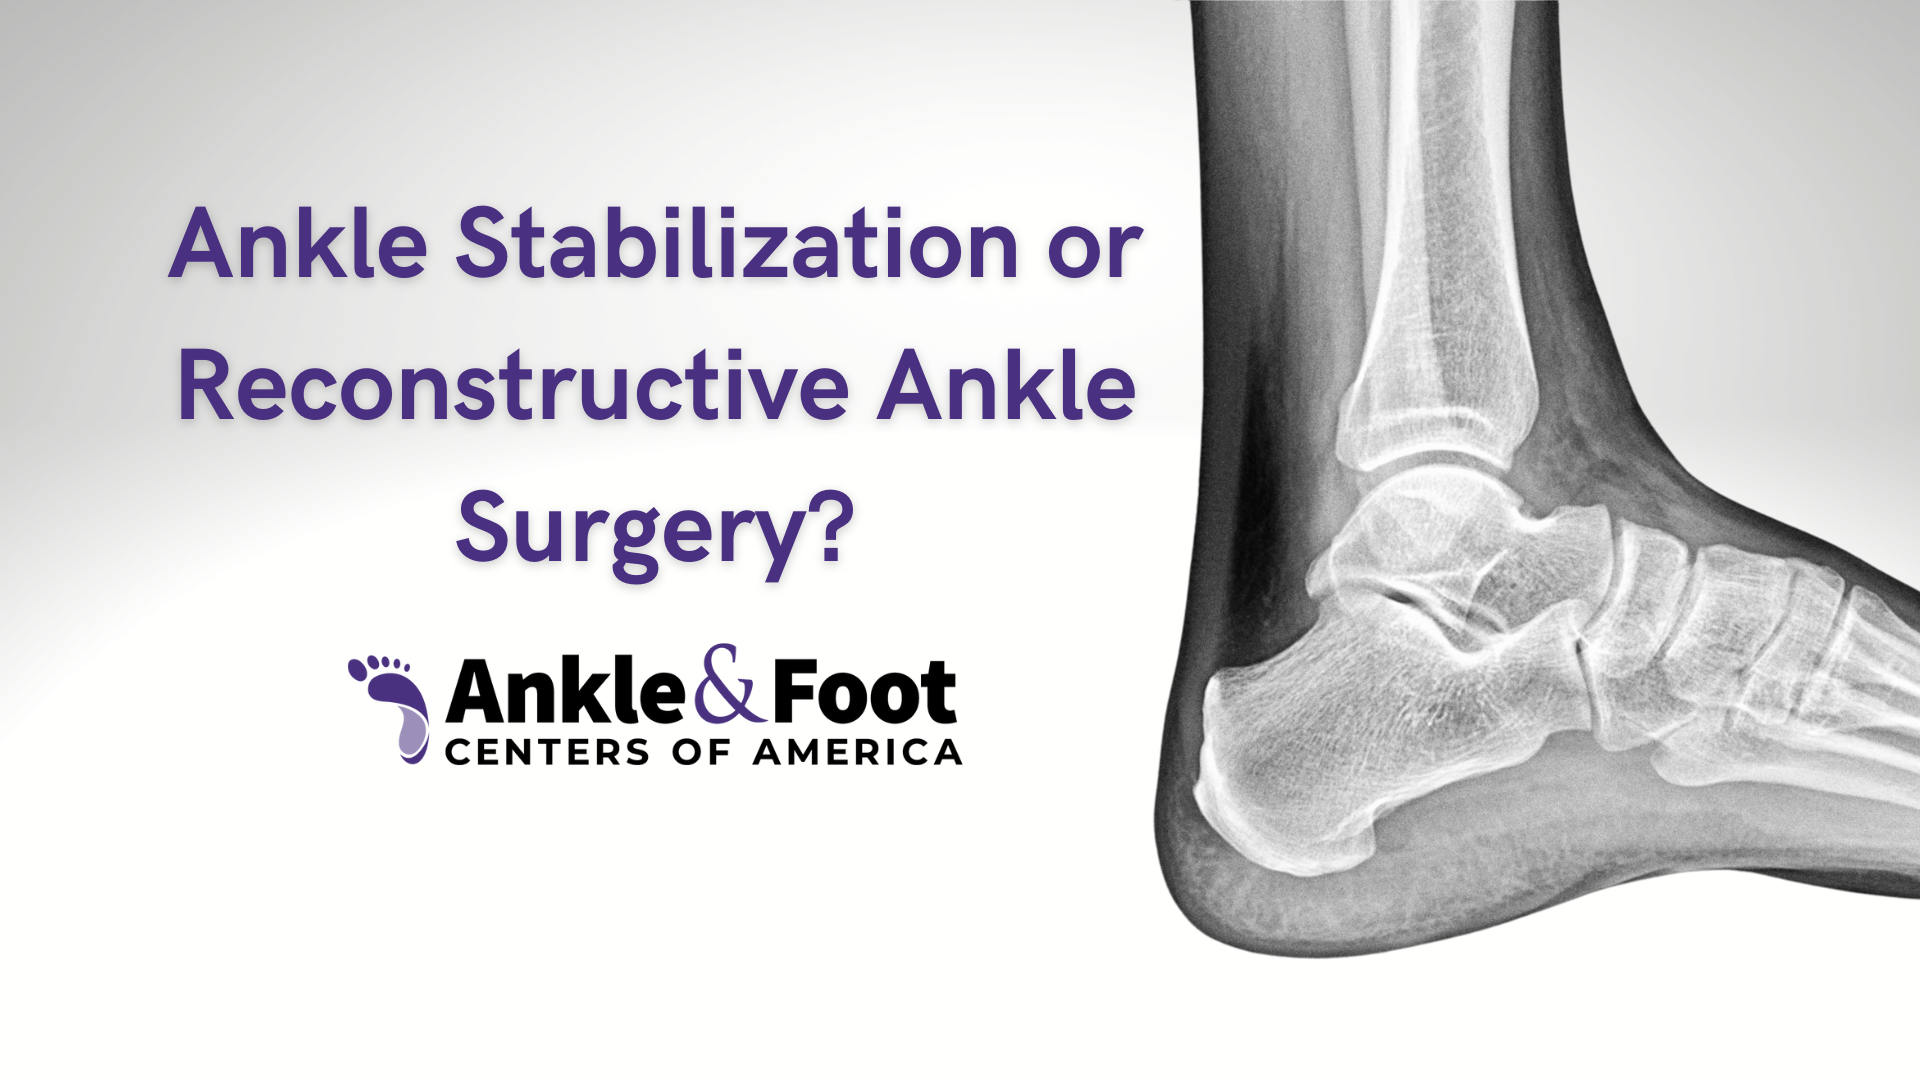 Ankle Stabilization or Reconstructive Ankle Surgery?